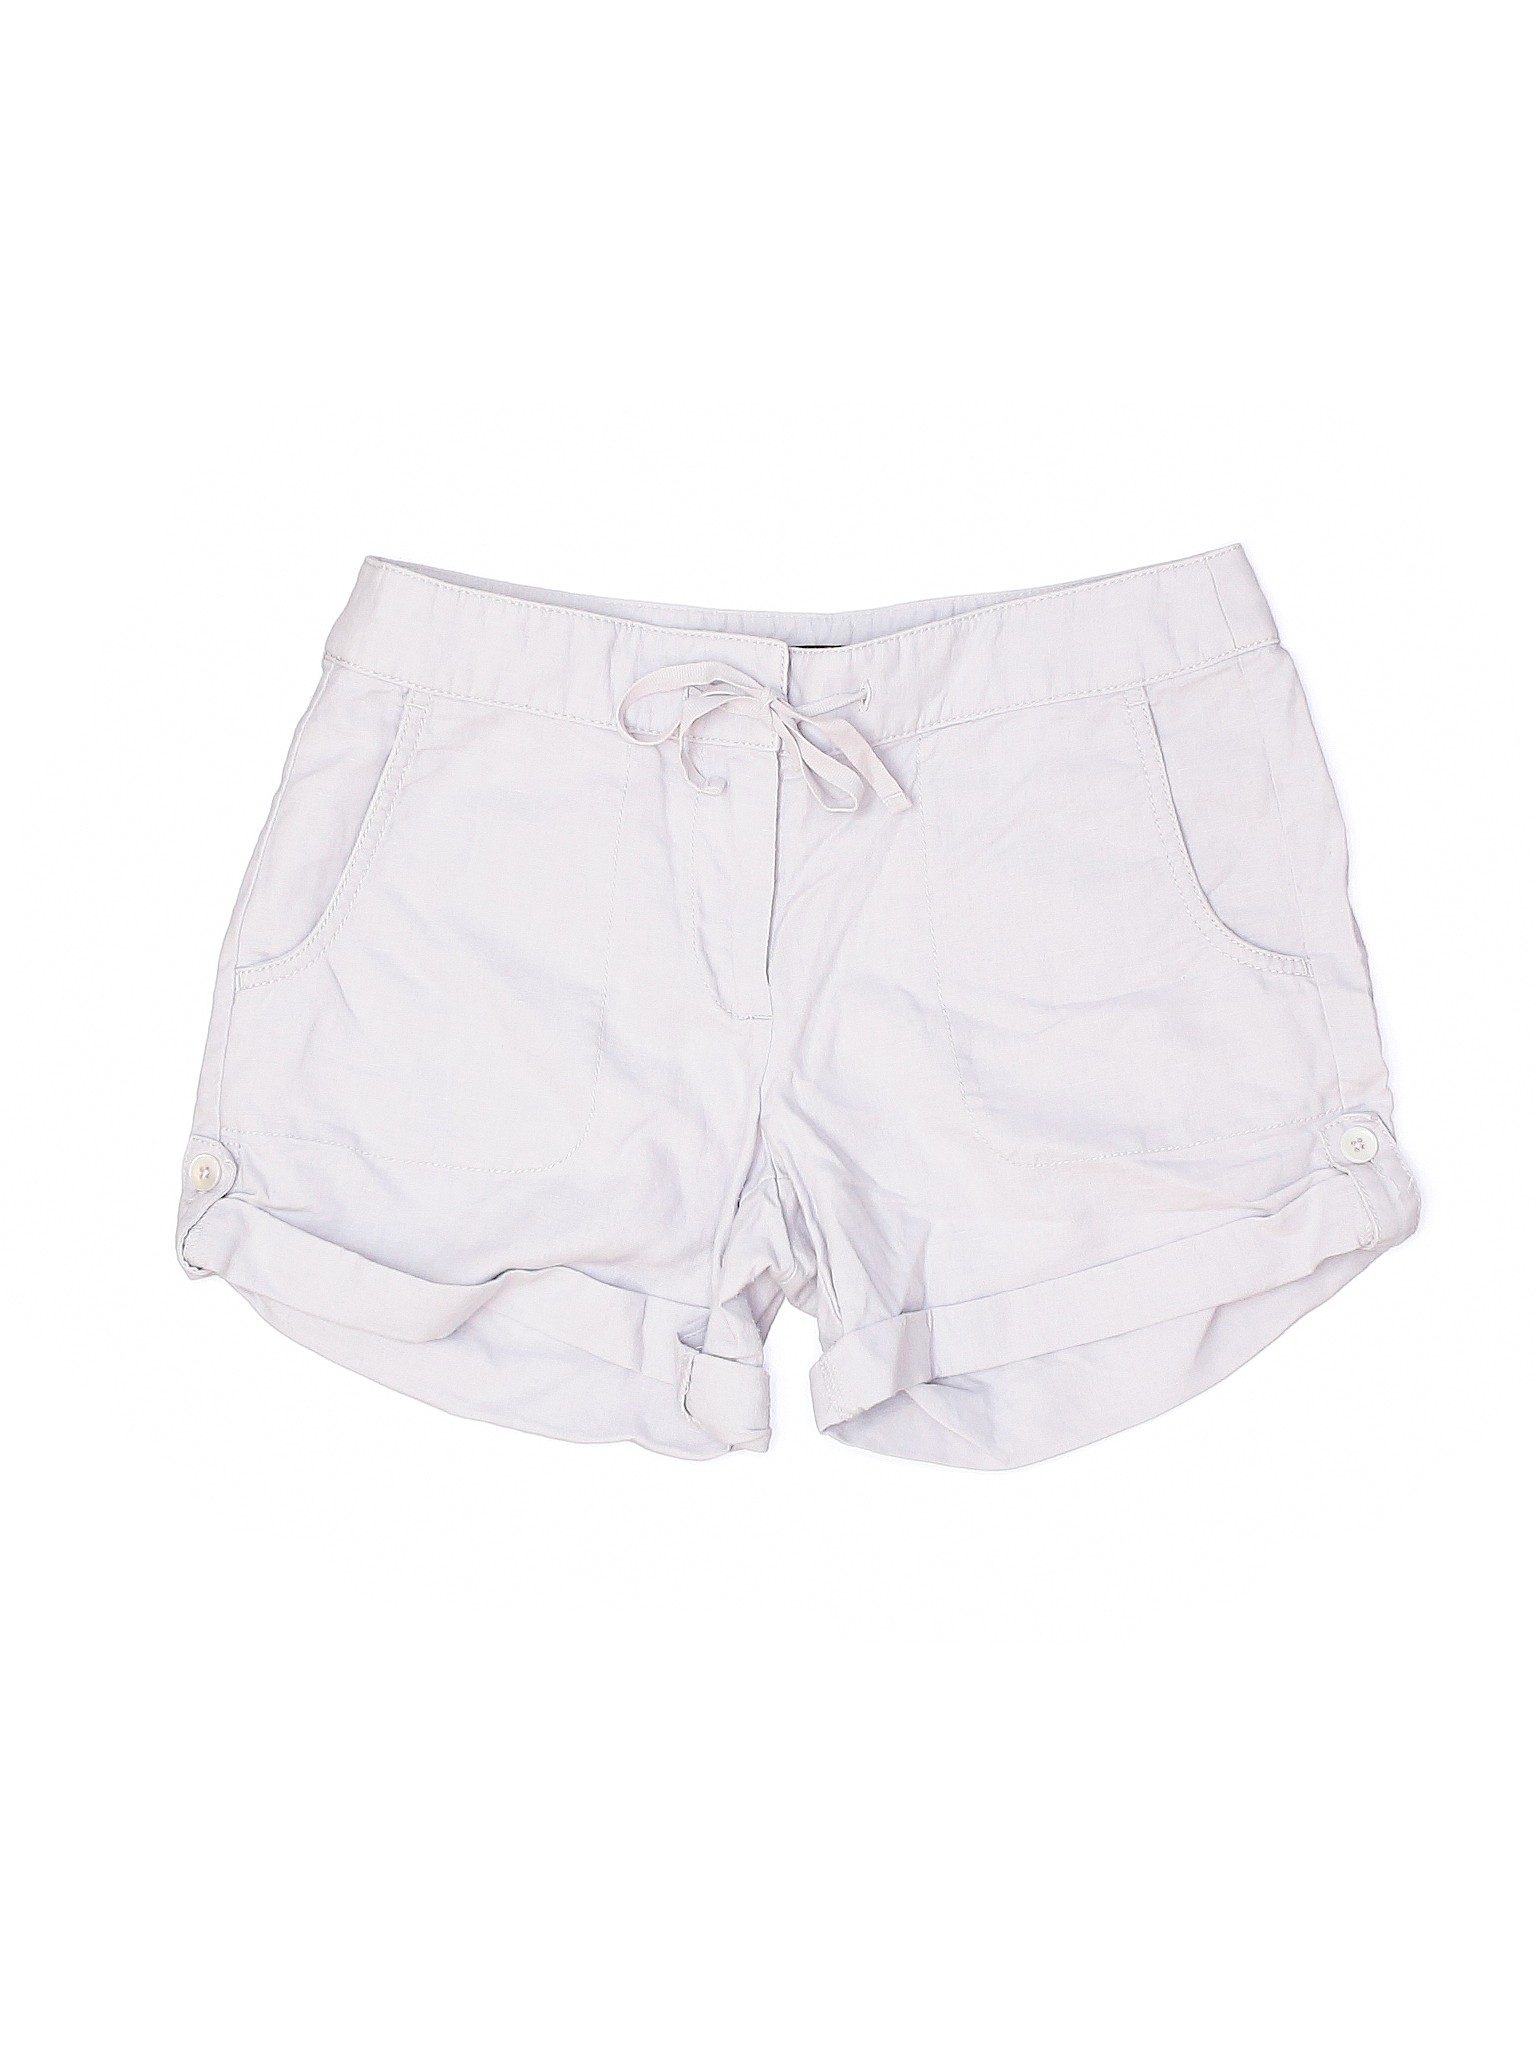 J.Crew Factory Store Solid White Gray Shorts Size 4 - 79% off | thredUP